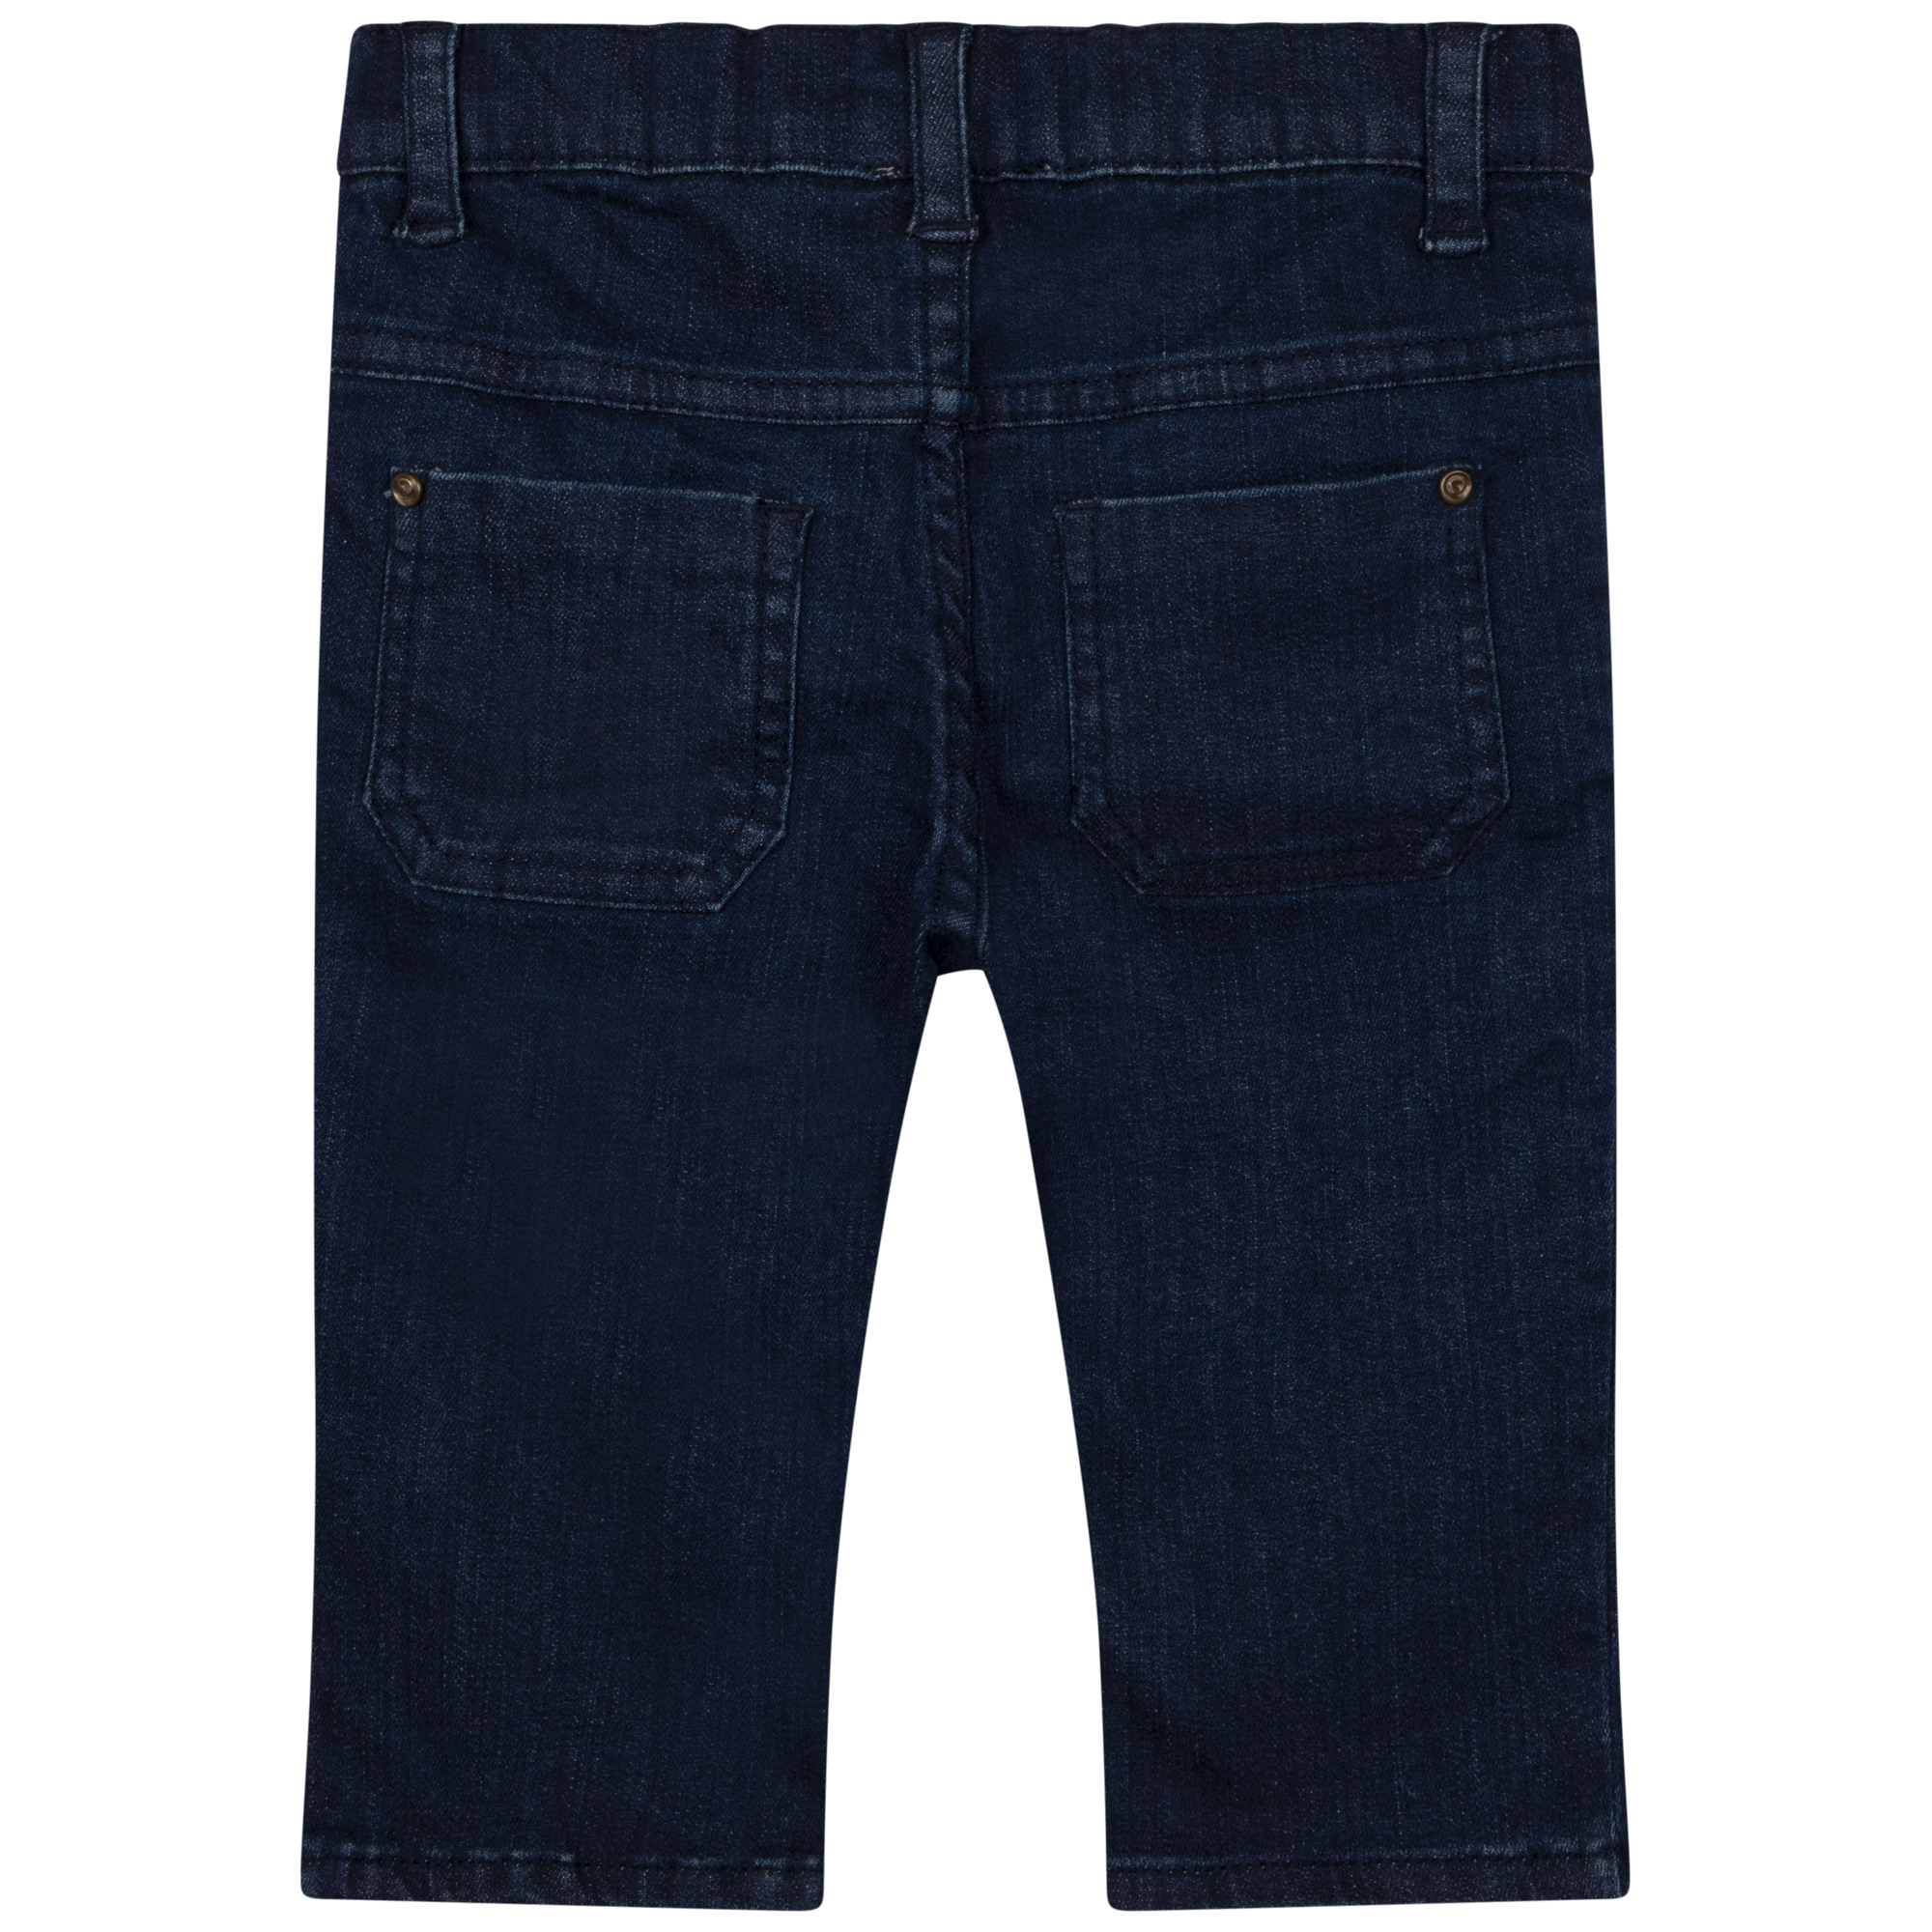 Fitted press stud jeans CARREMENT BEAU for BOY